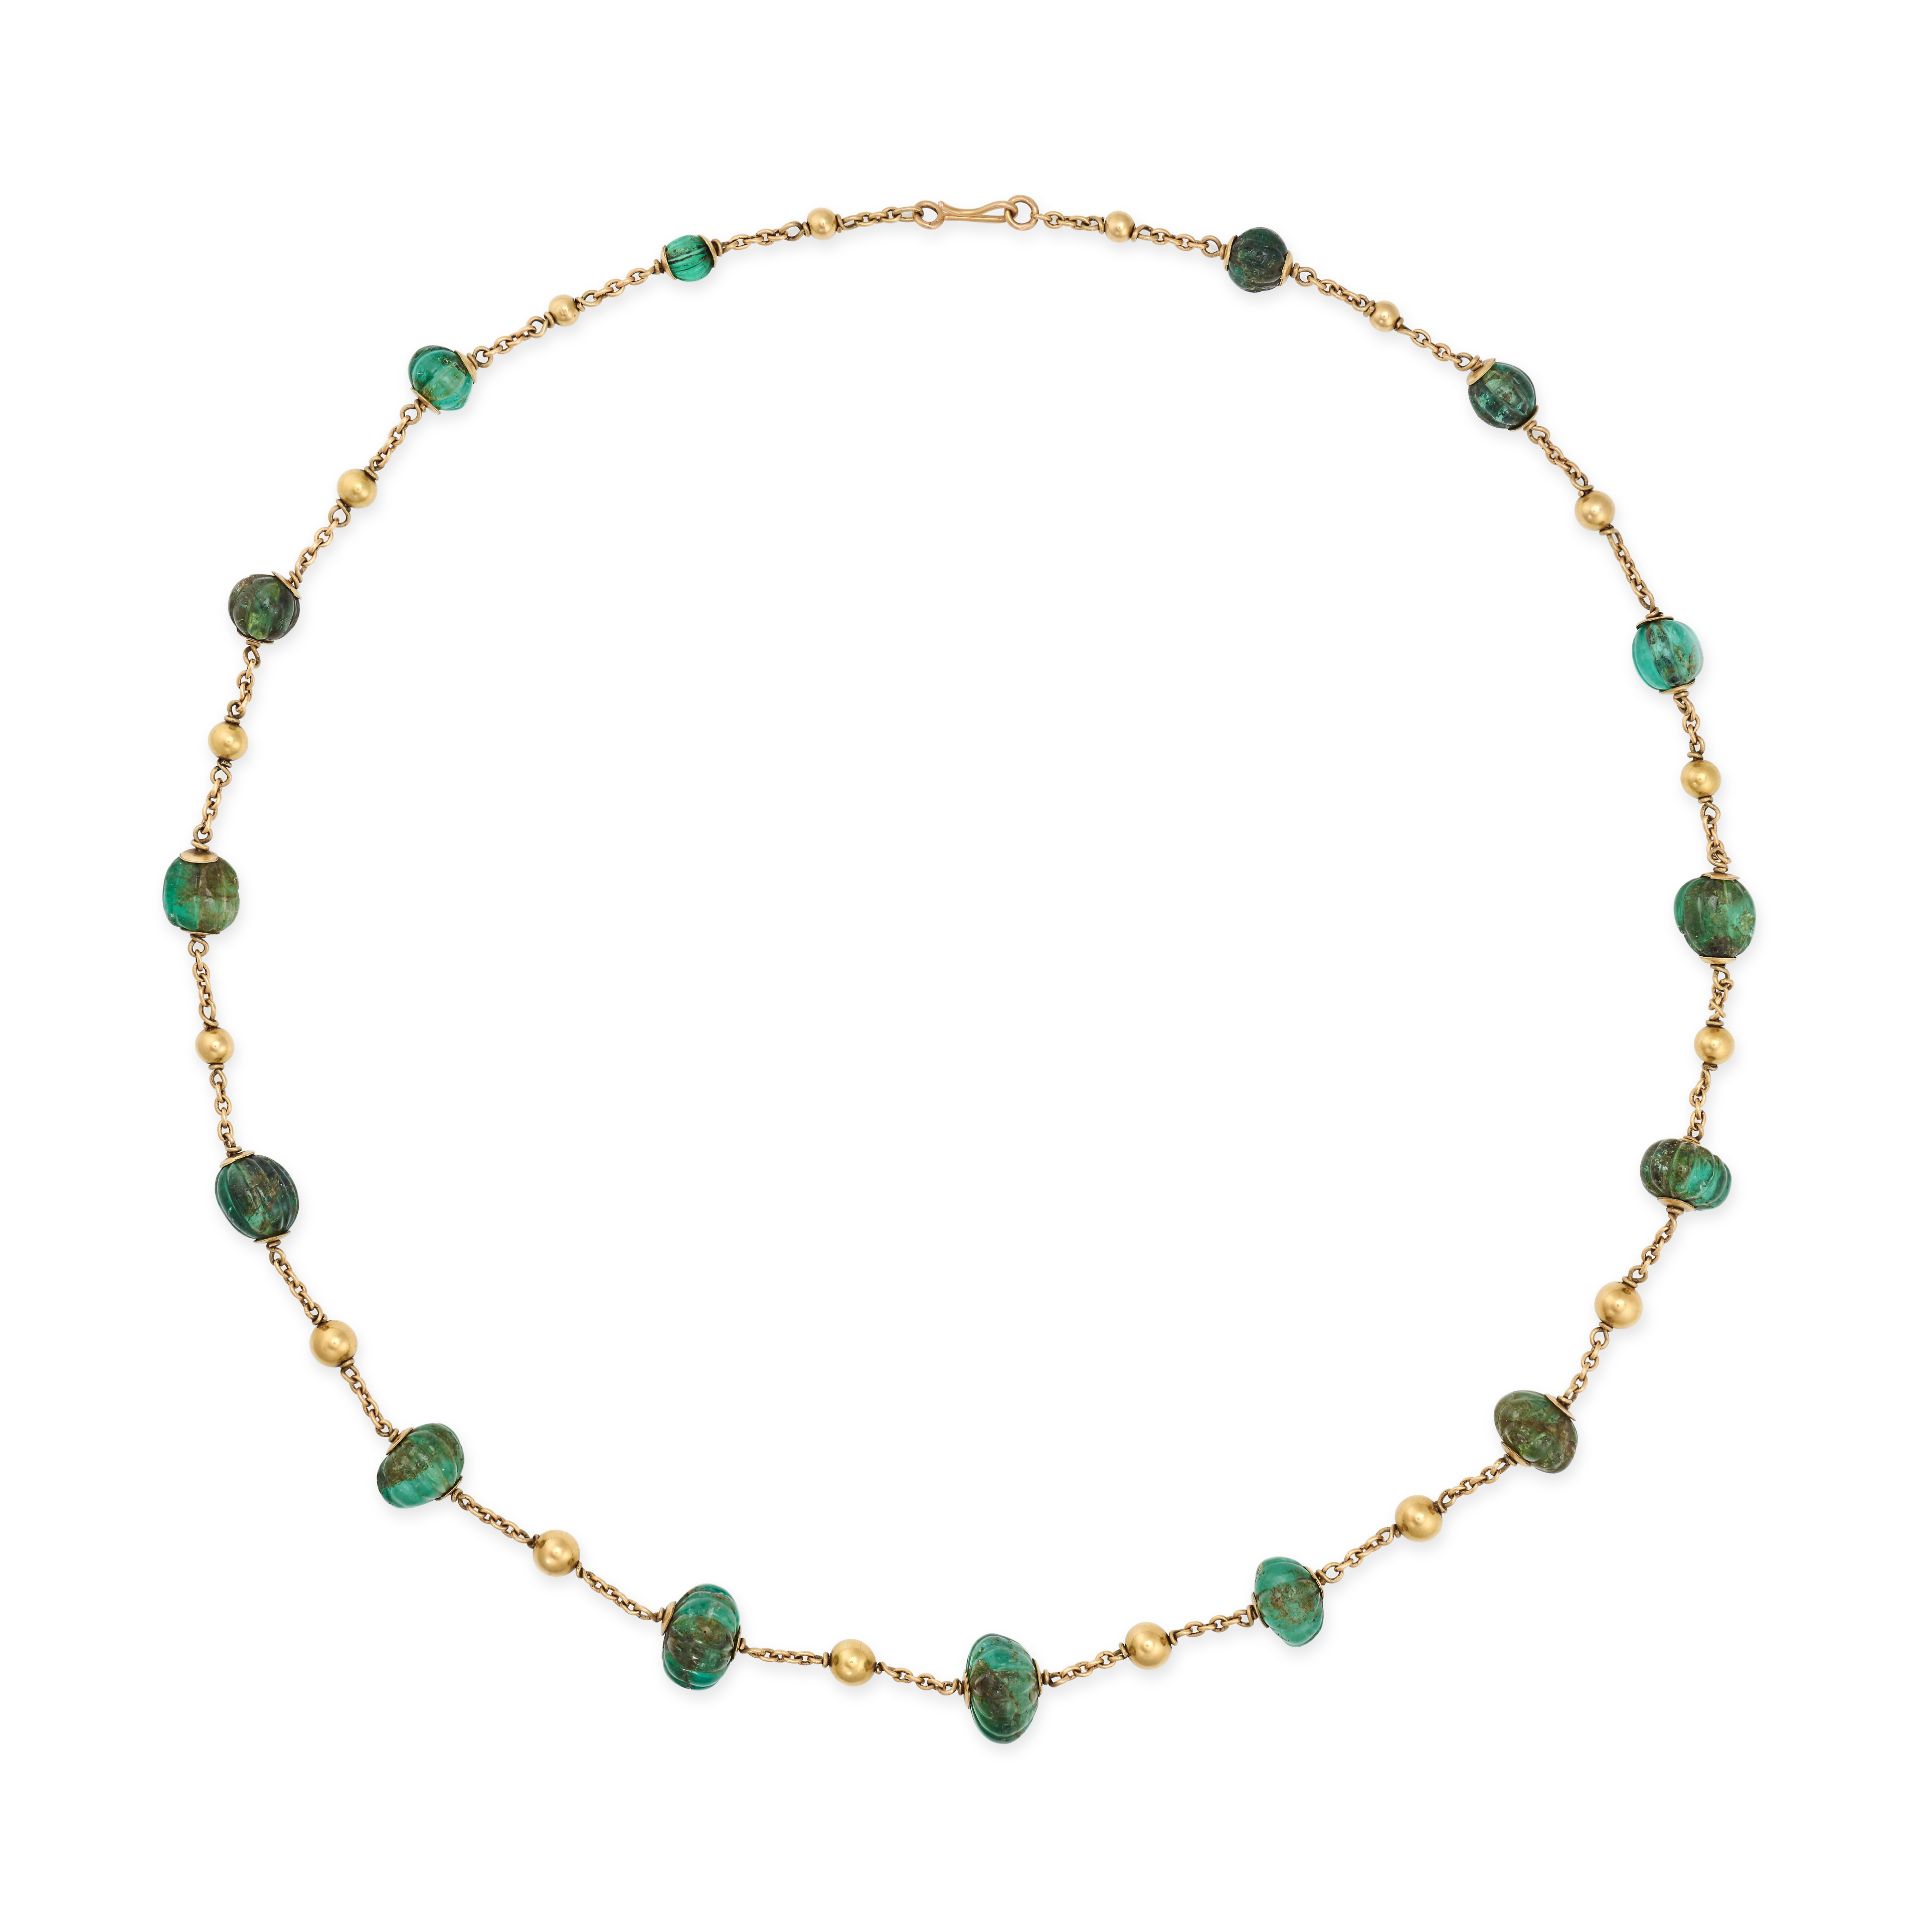 A FRENCH EMERALD SAUTOIR NECKLACE in 18ct yellow gold, set with carved emerald beads, accented by...